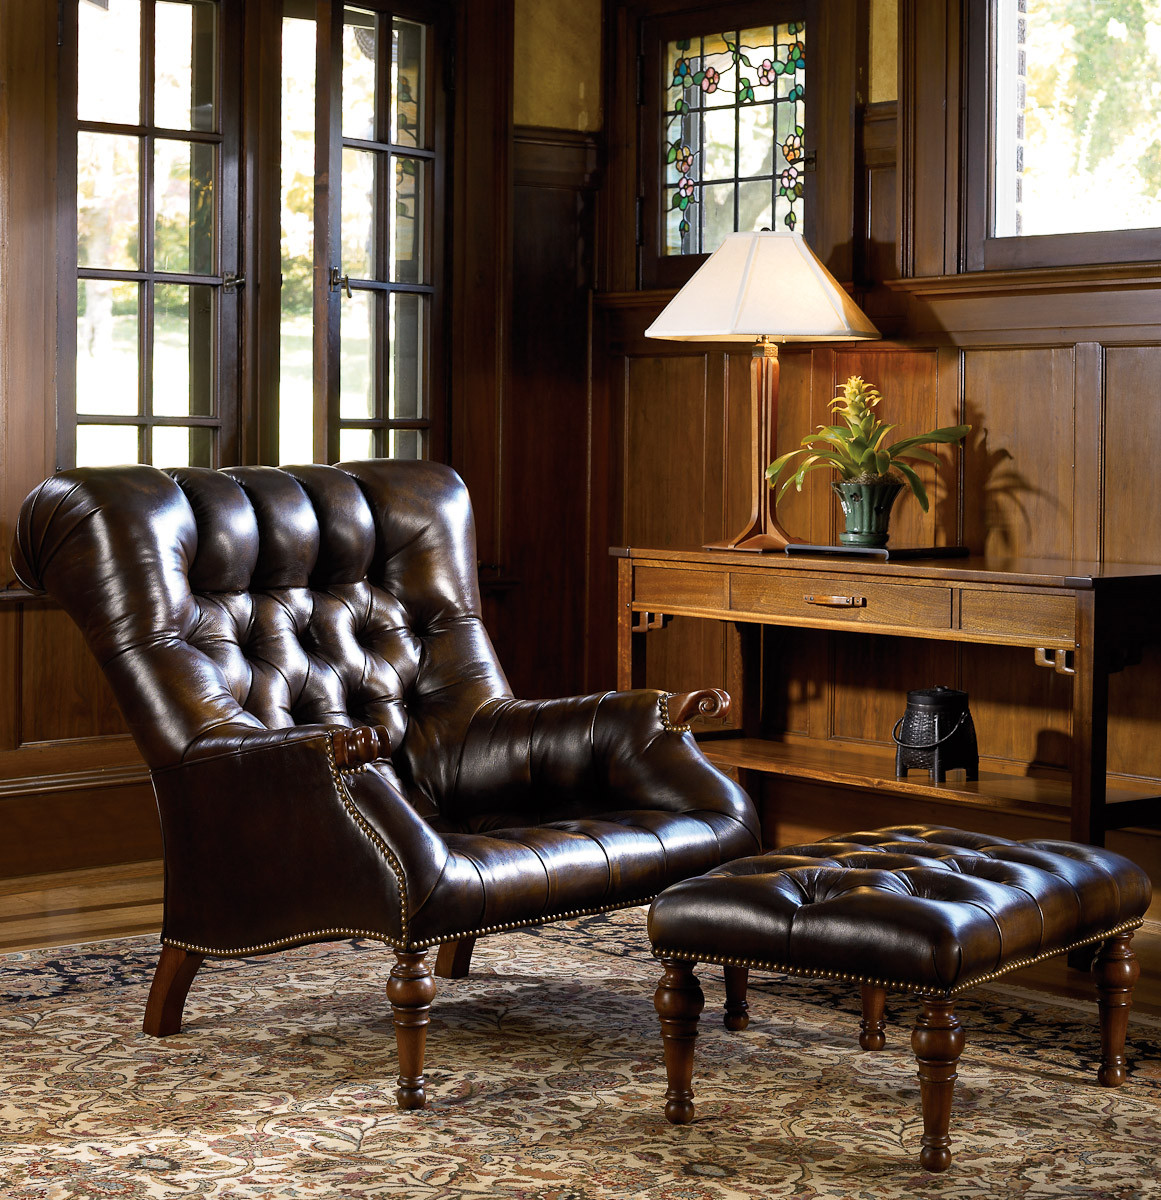 Living Room Recliner Chairs
 Living Room Leather Furniture